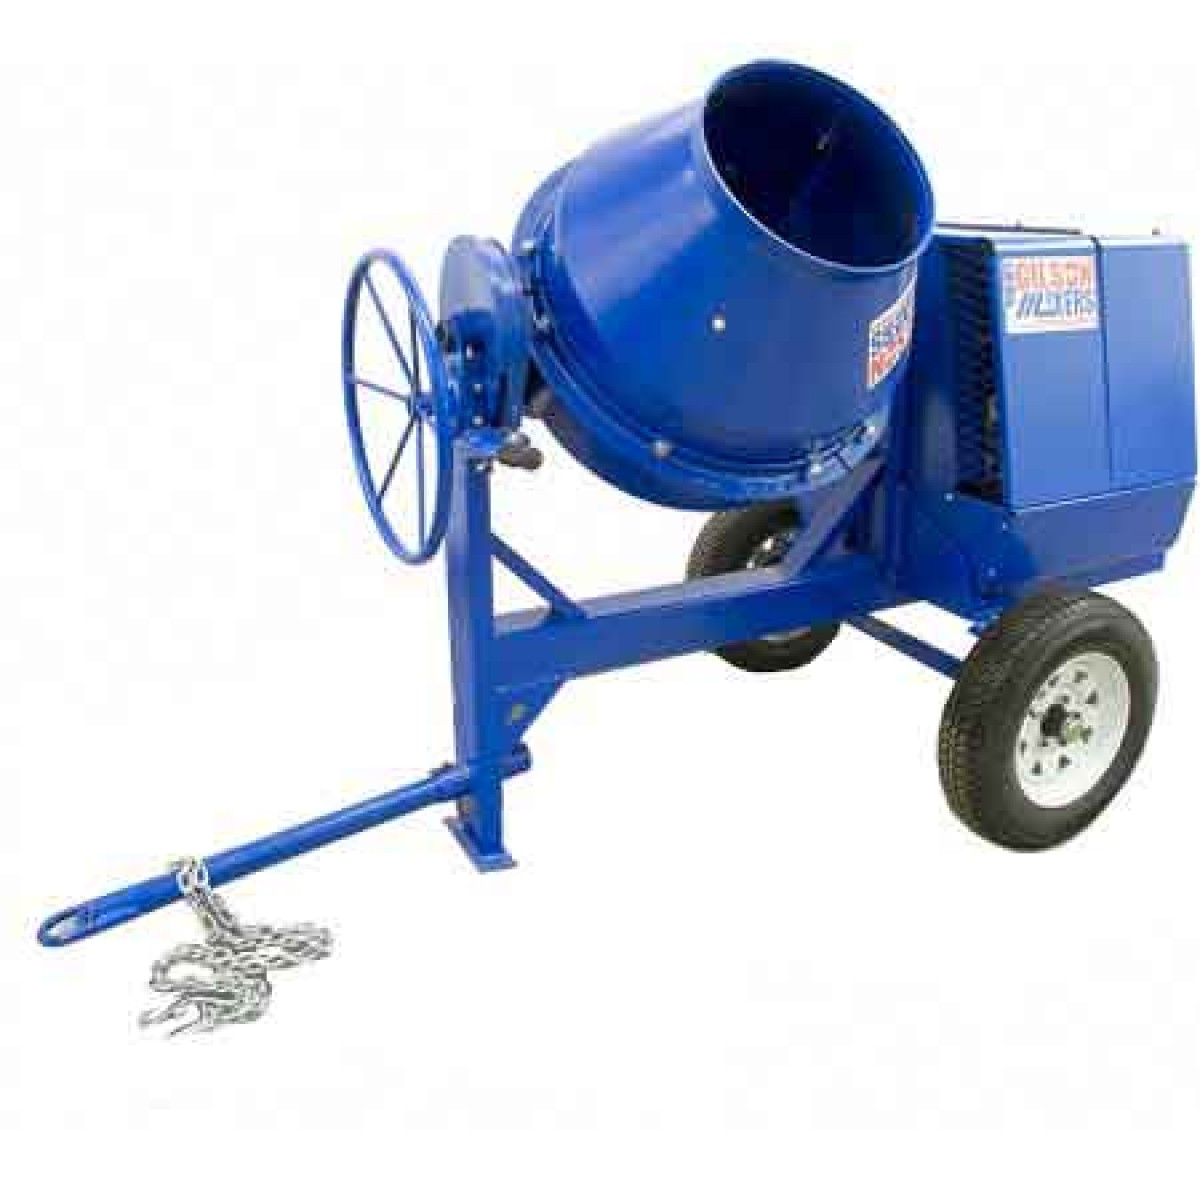 Comparison of Hand-Tow and Poly-Drum Gilson cement mixers